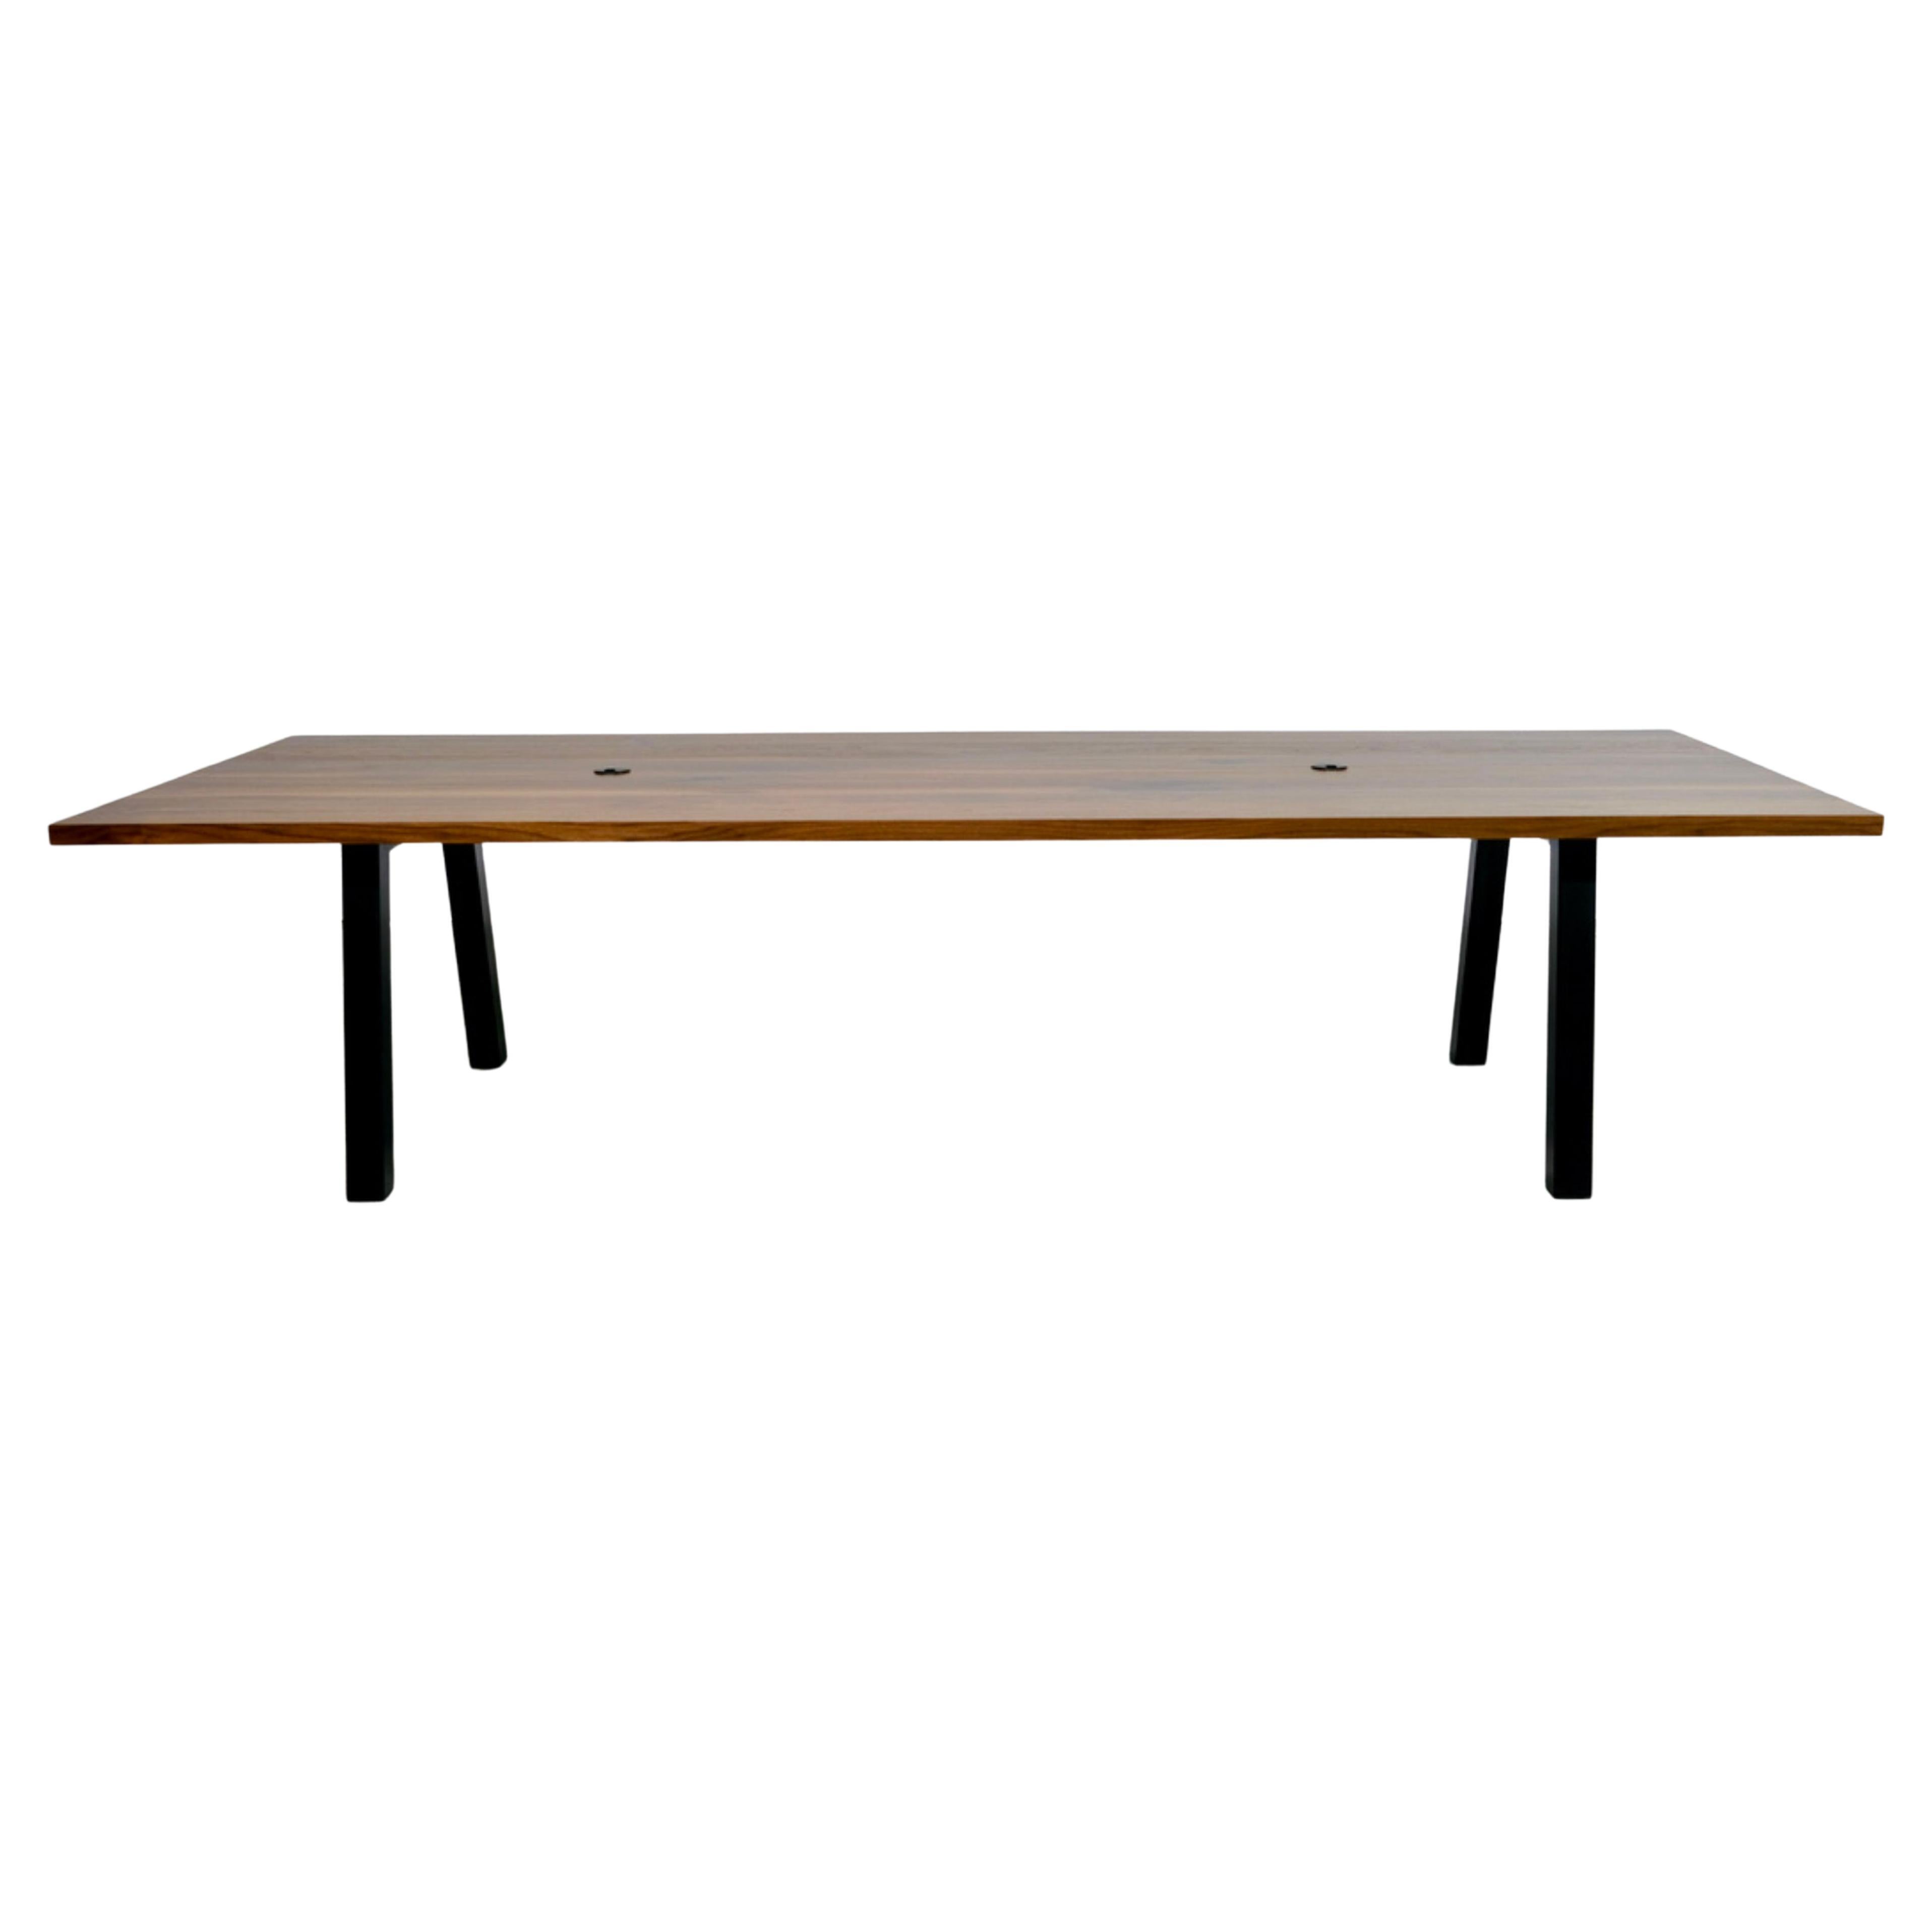 This solid wood conference table is built to last. Featuring satin black powder coated steel legs a solid wood top and optional grommets of your choice. Because each piece is handcrafted by our skilled team, you can be sure that your new table will